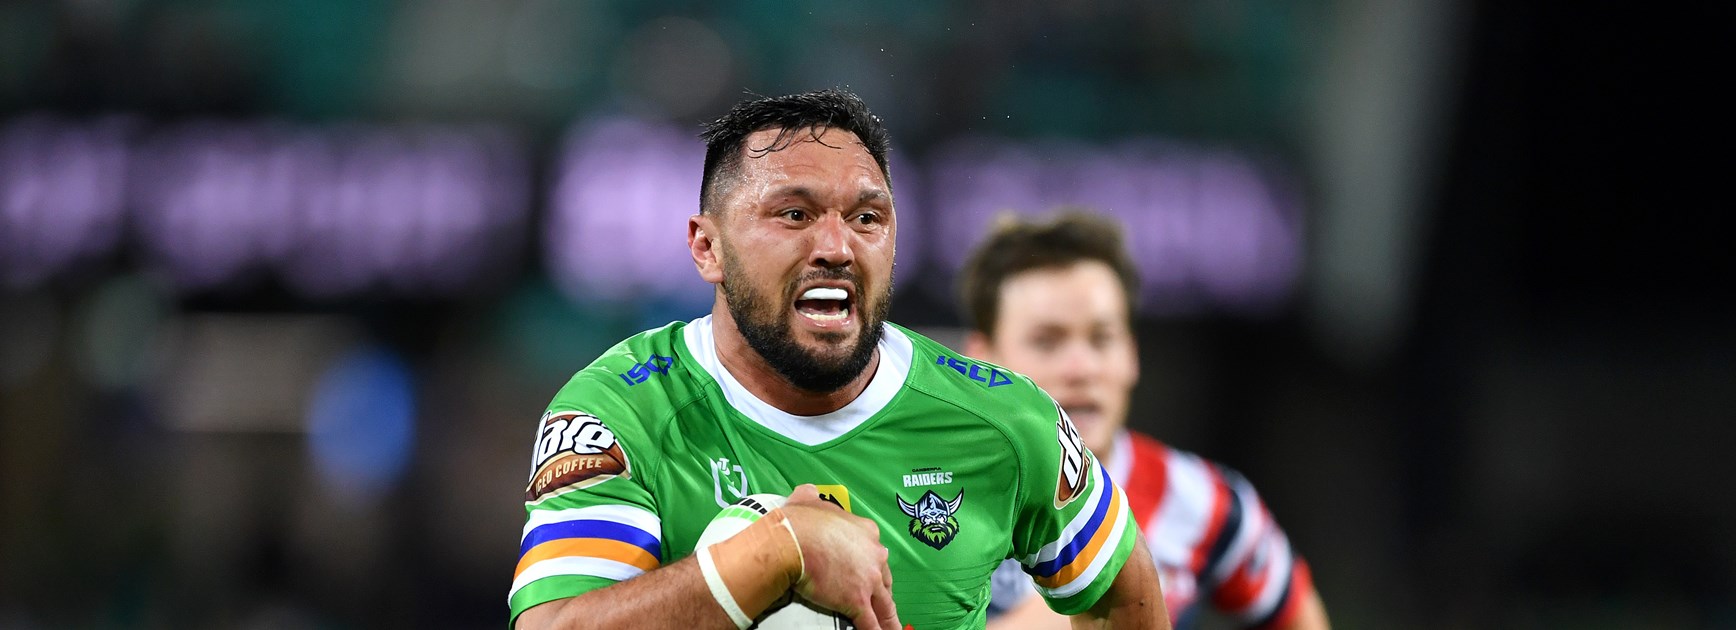 Jordan Rapana Re-Signs with the Raiders for 2021